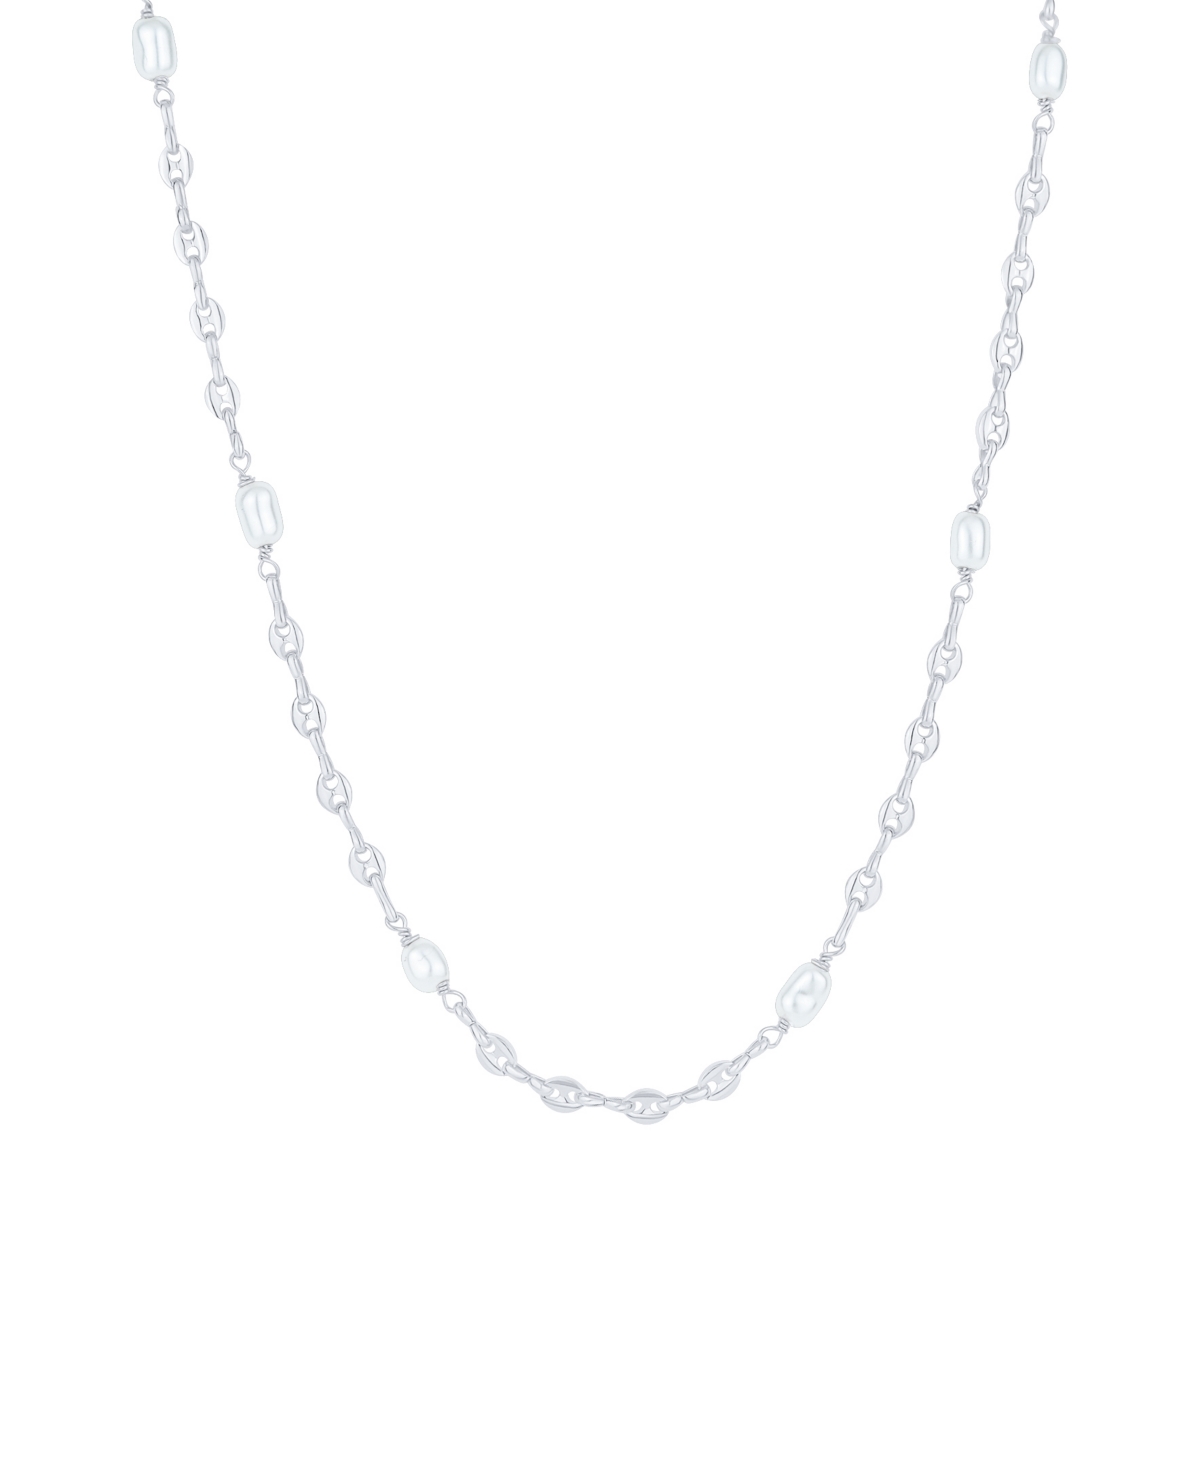 White Imitation Pearl Necklace - Silver